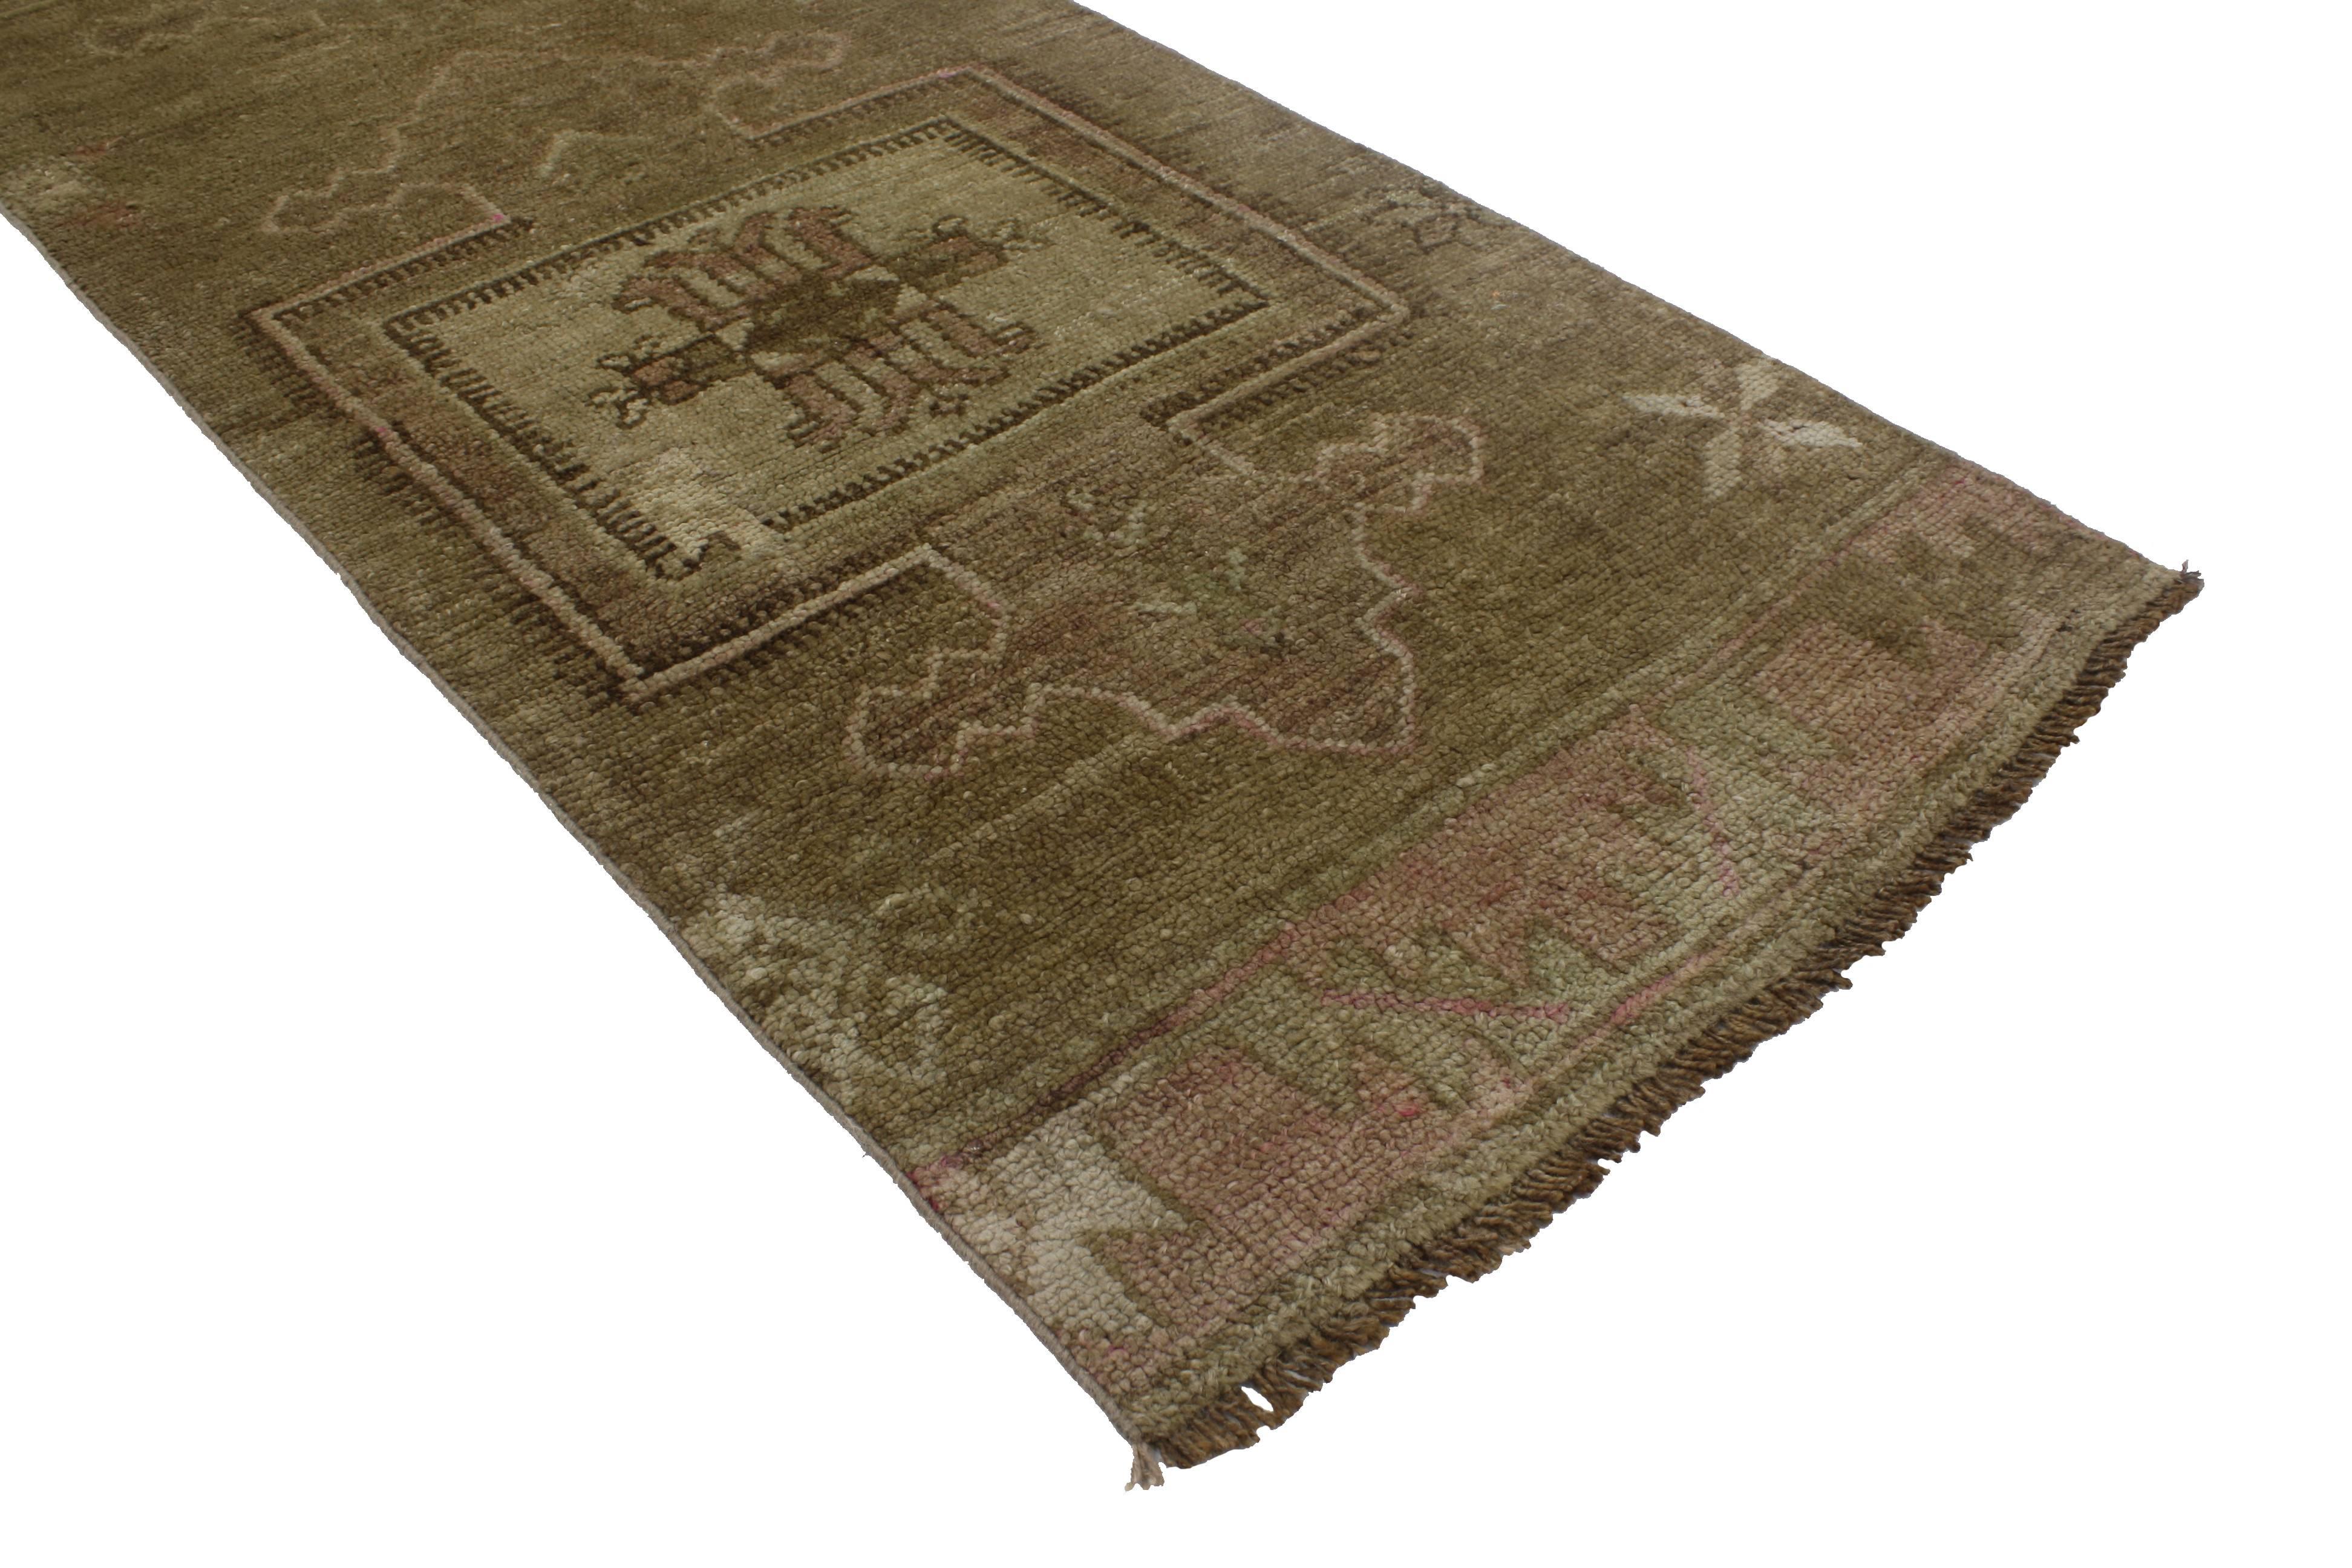 51807 Vintage Turkish Oushak Extra-Long Runner with Modern Style, Hallway Runner. Add personality to your space with a modern take on eclectic style. This vintage Turkish Oushak runner with modern contemporary style manages to maintain its true